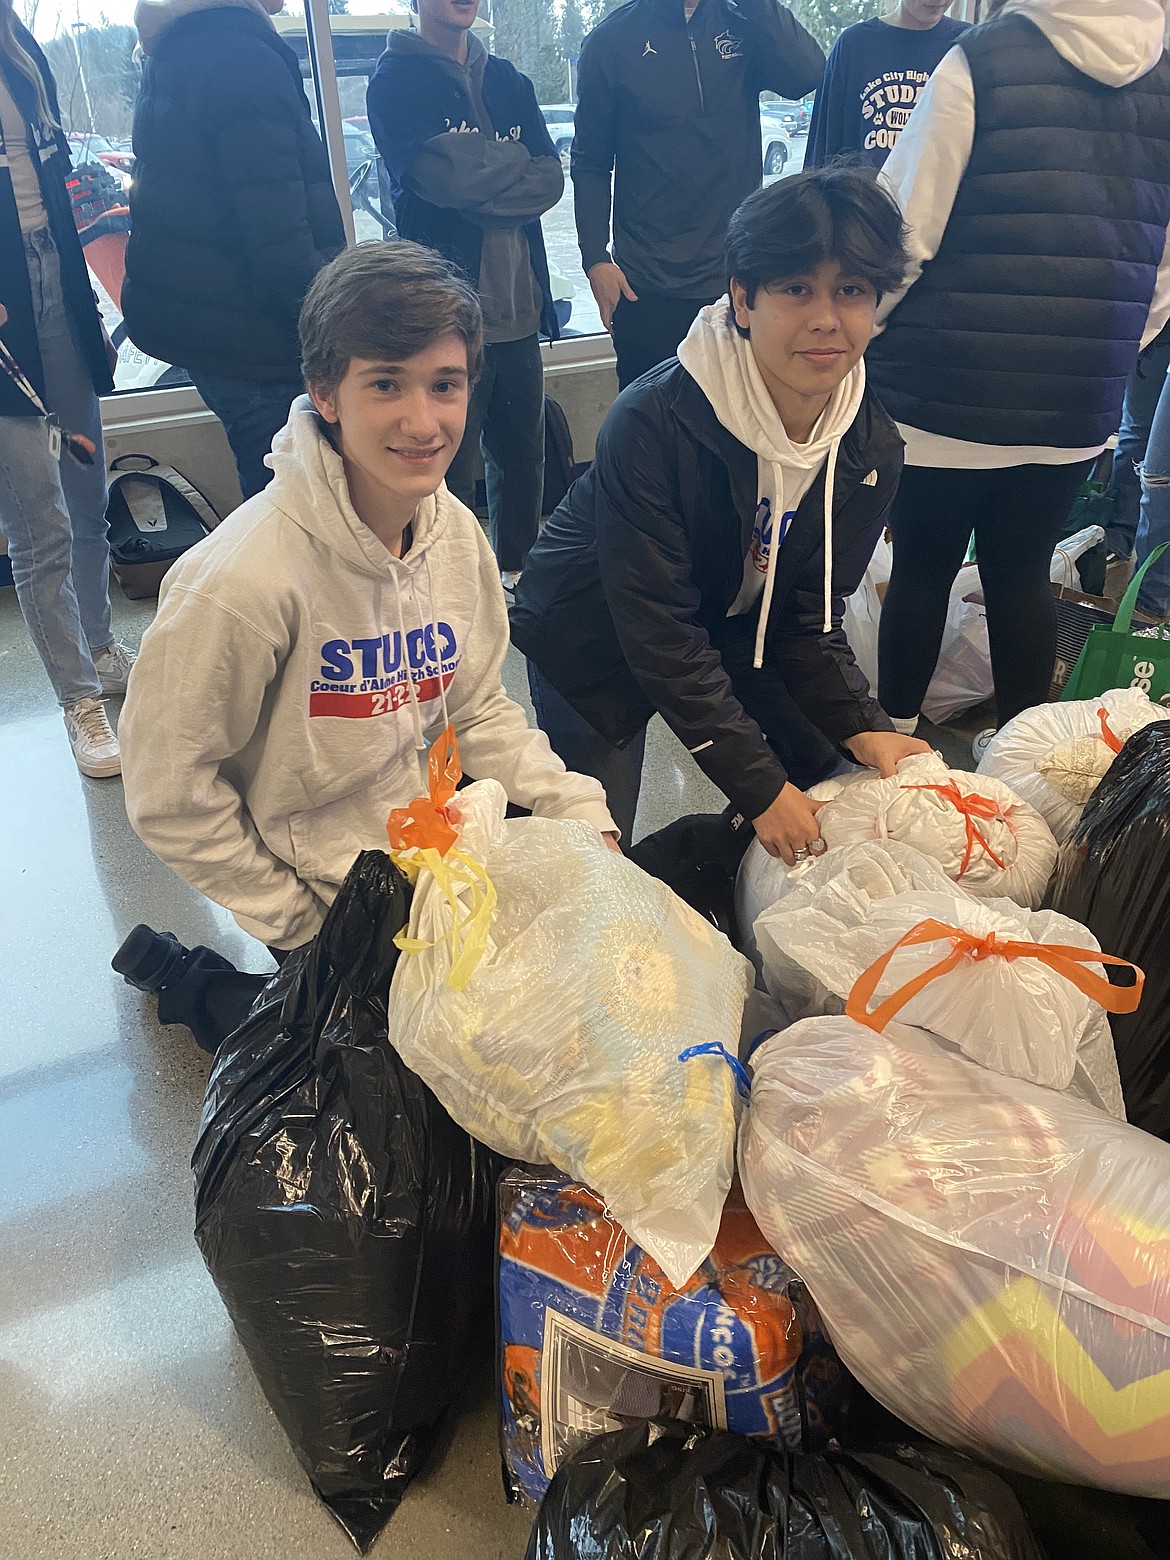 From left: CHS Student Council representatives Andrew Overland and Chief Allan are part of the All with AWL (All With Love) charity campaign run by the Coeur d'Alene and Lake City high schools. For the month of January, both student bodies collected needed items for clients of St. Vincent DePaul North Idaho, Safe Passage Violence Prevention Center, Union Gospel Mission and the Kootenai Humane Society.